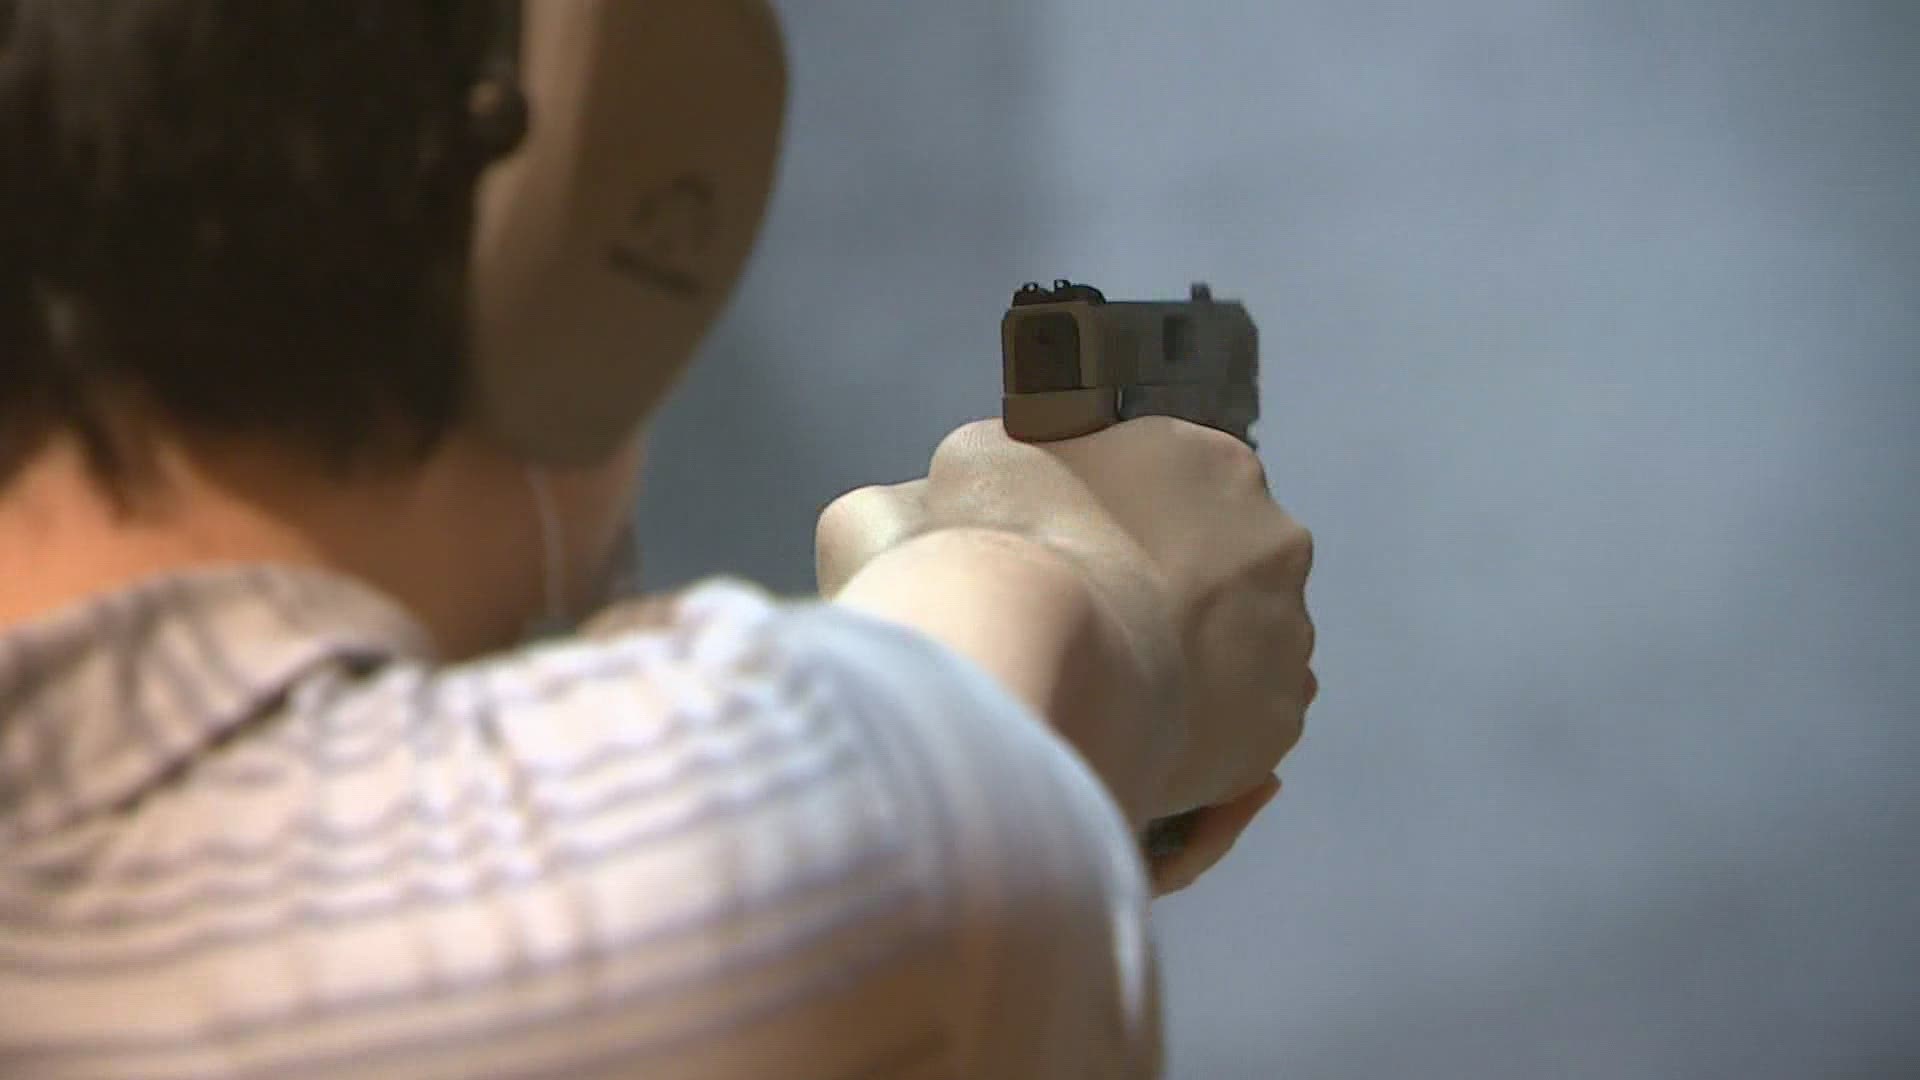 Gov. Greg Abbott is expected to sign a bill that would allow people over the age of 21 to carry a gun without a permit.